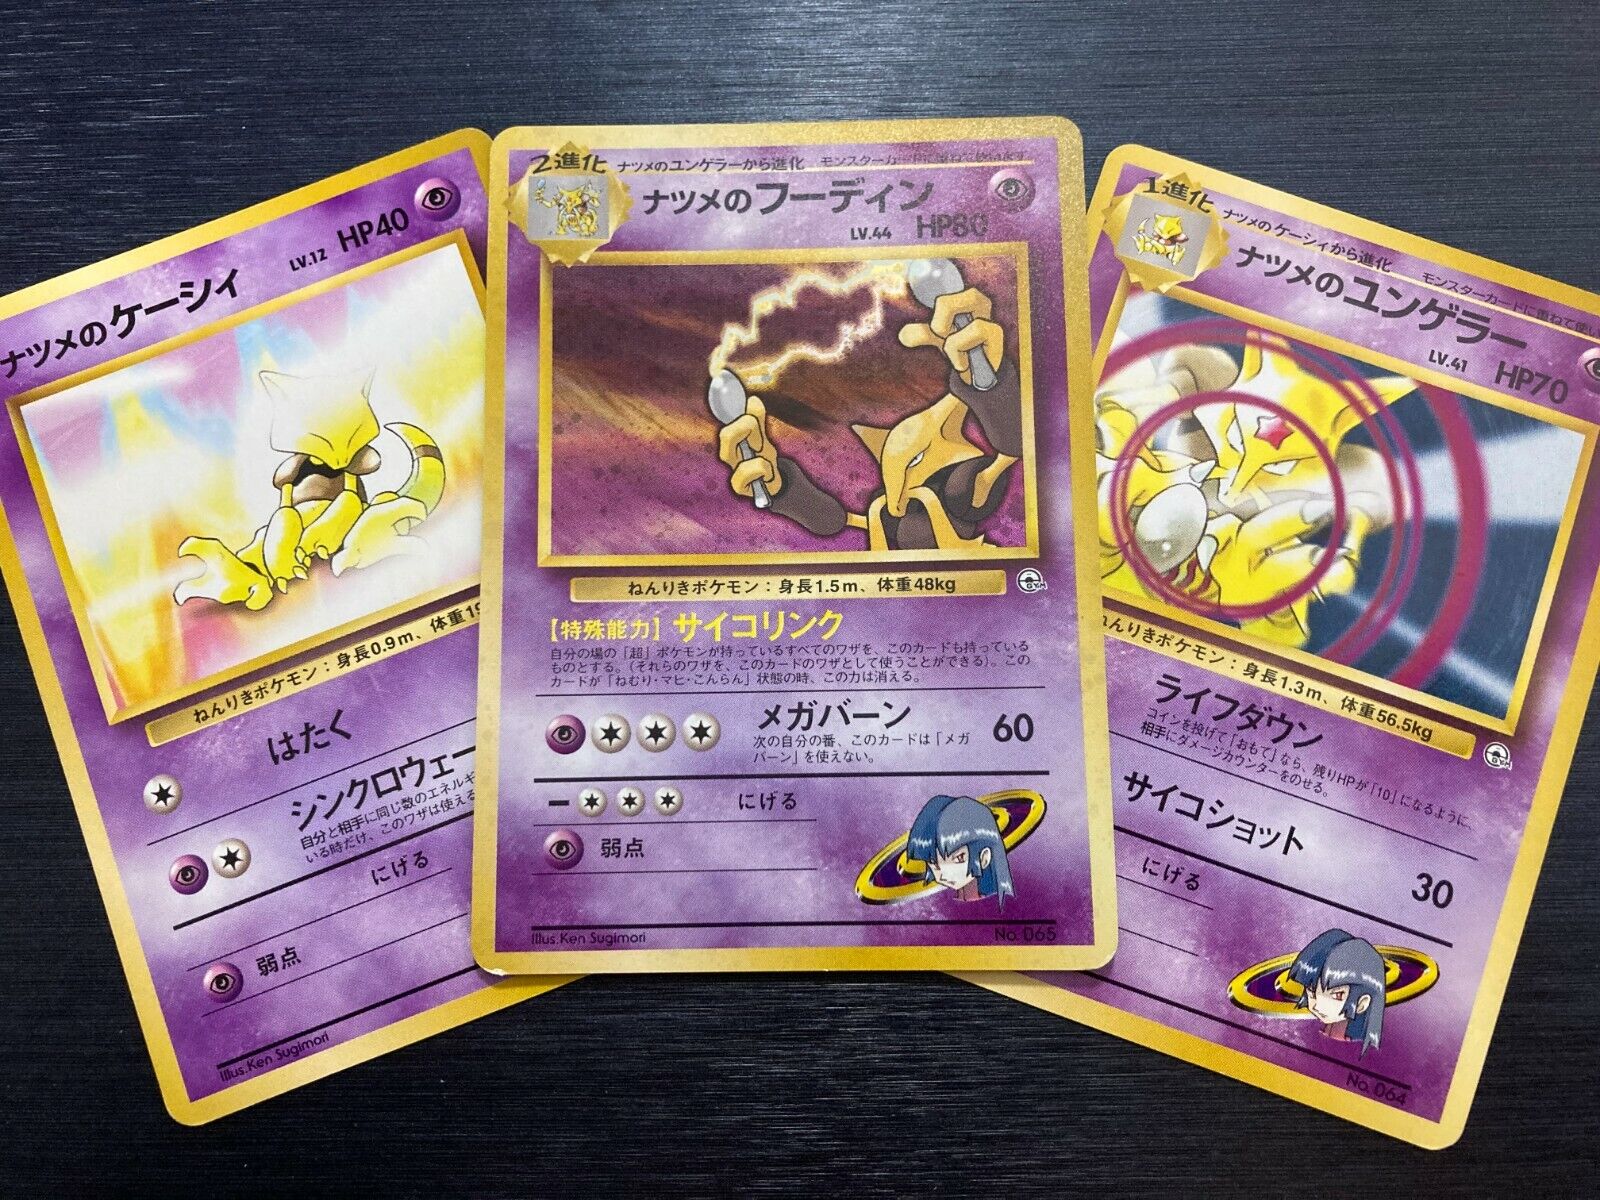 What set is this Alakazam Ex from? : r/PokemonTCG